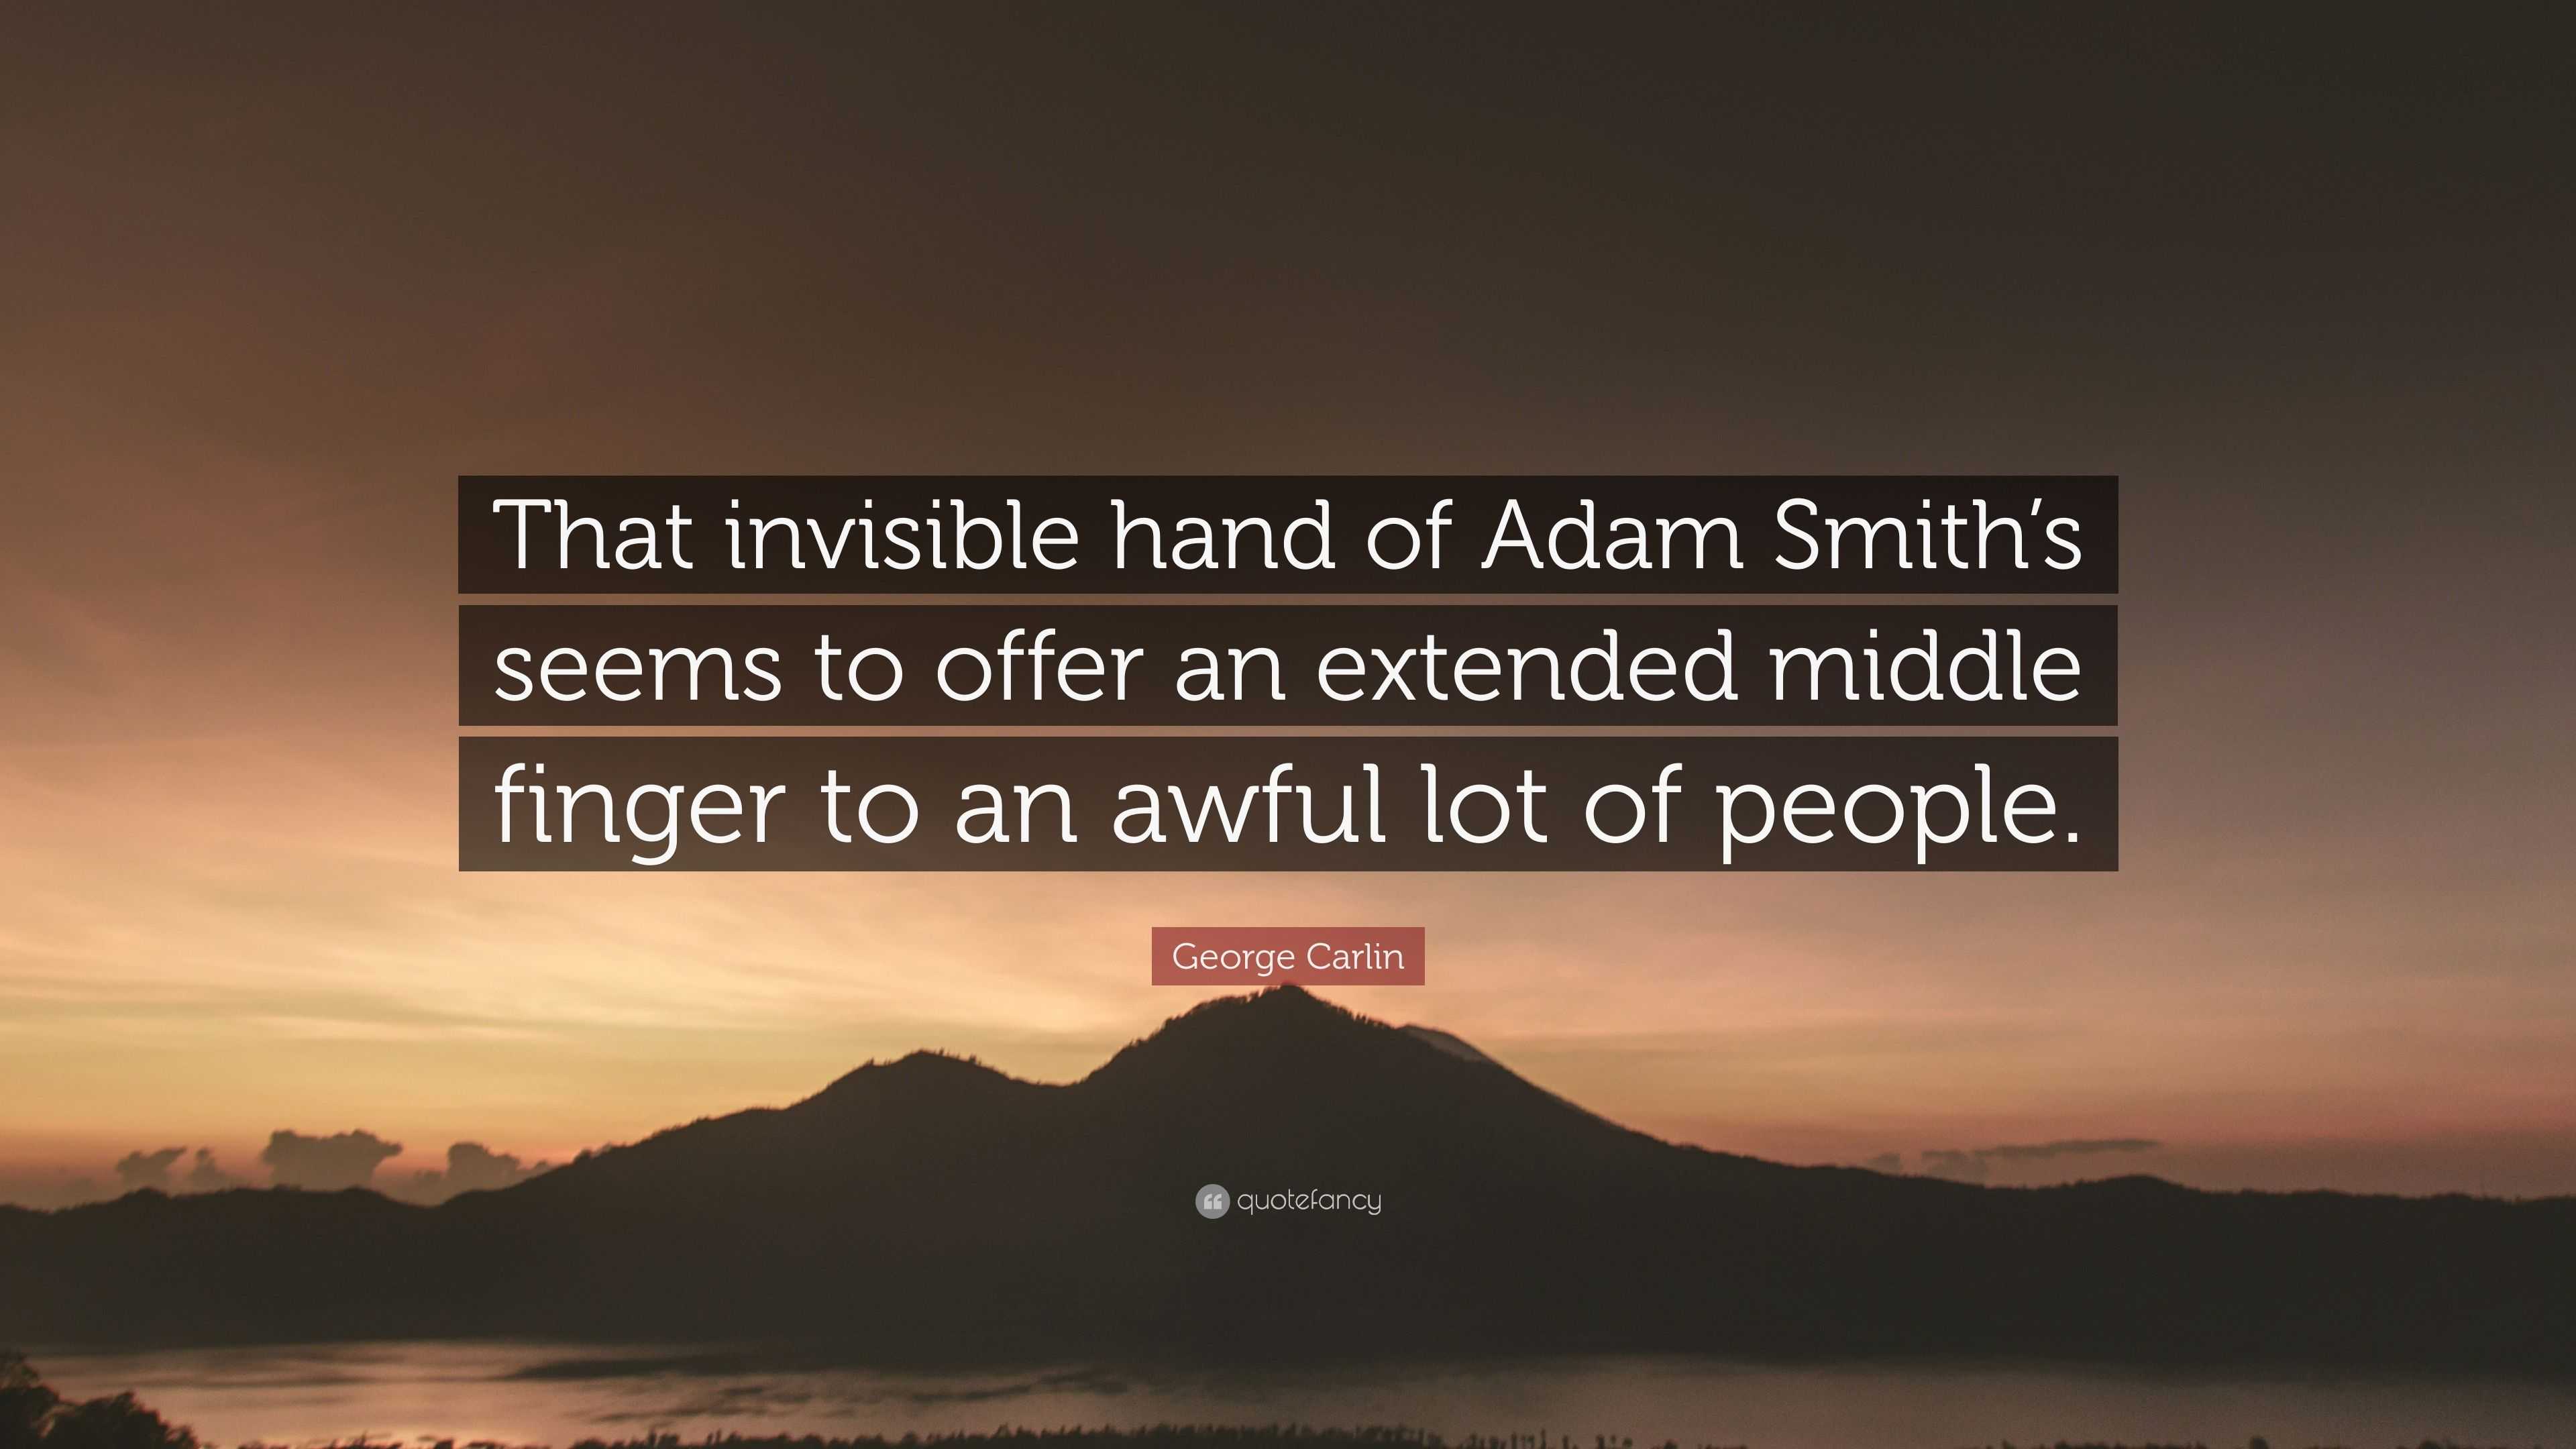 adam smith invisible hand theory